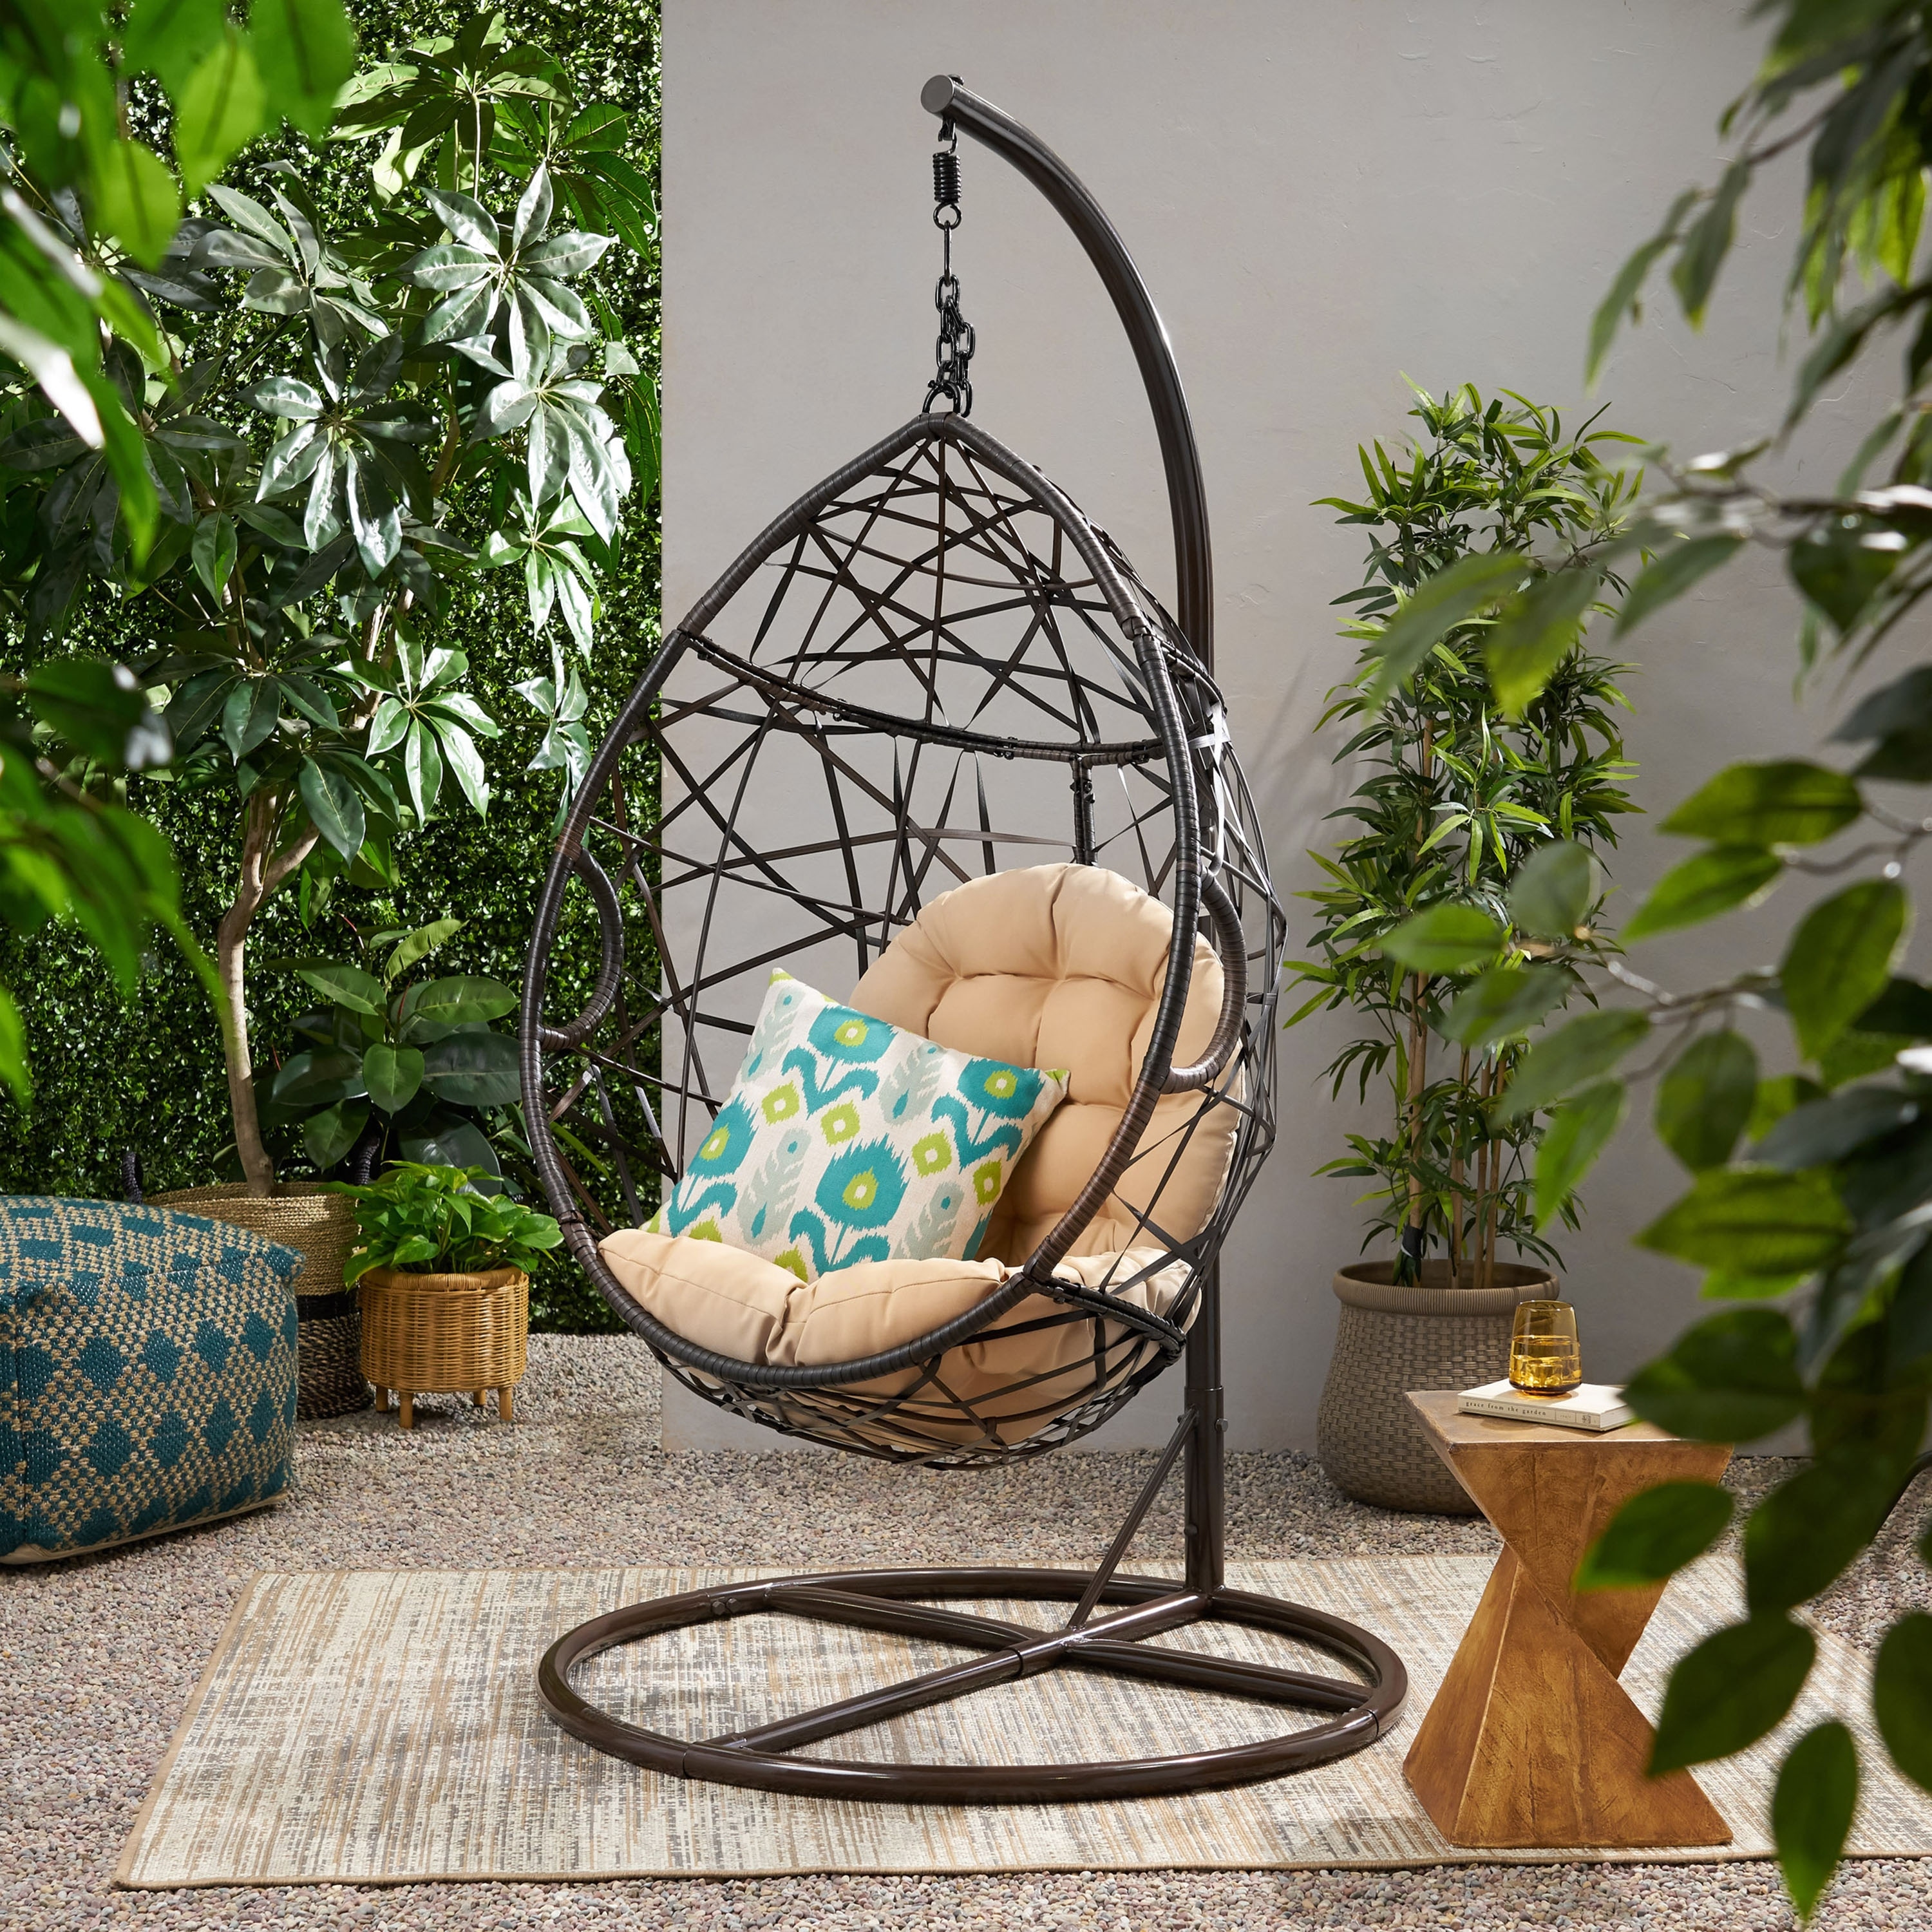 https://ak1.ostkcdn.com/images/products/is/images/direct/c55c885acab3897c67a49d161d9b5f604f87c2d3/Cayuse-Wicker-Tear-Drop-Hanging-Chair-by-Christopher-Knight-Home.jpg